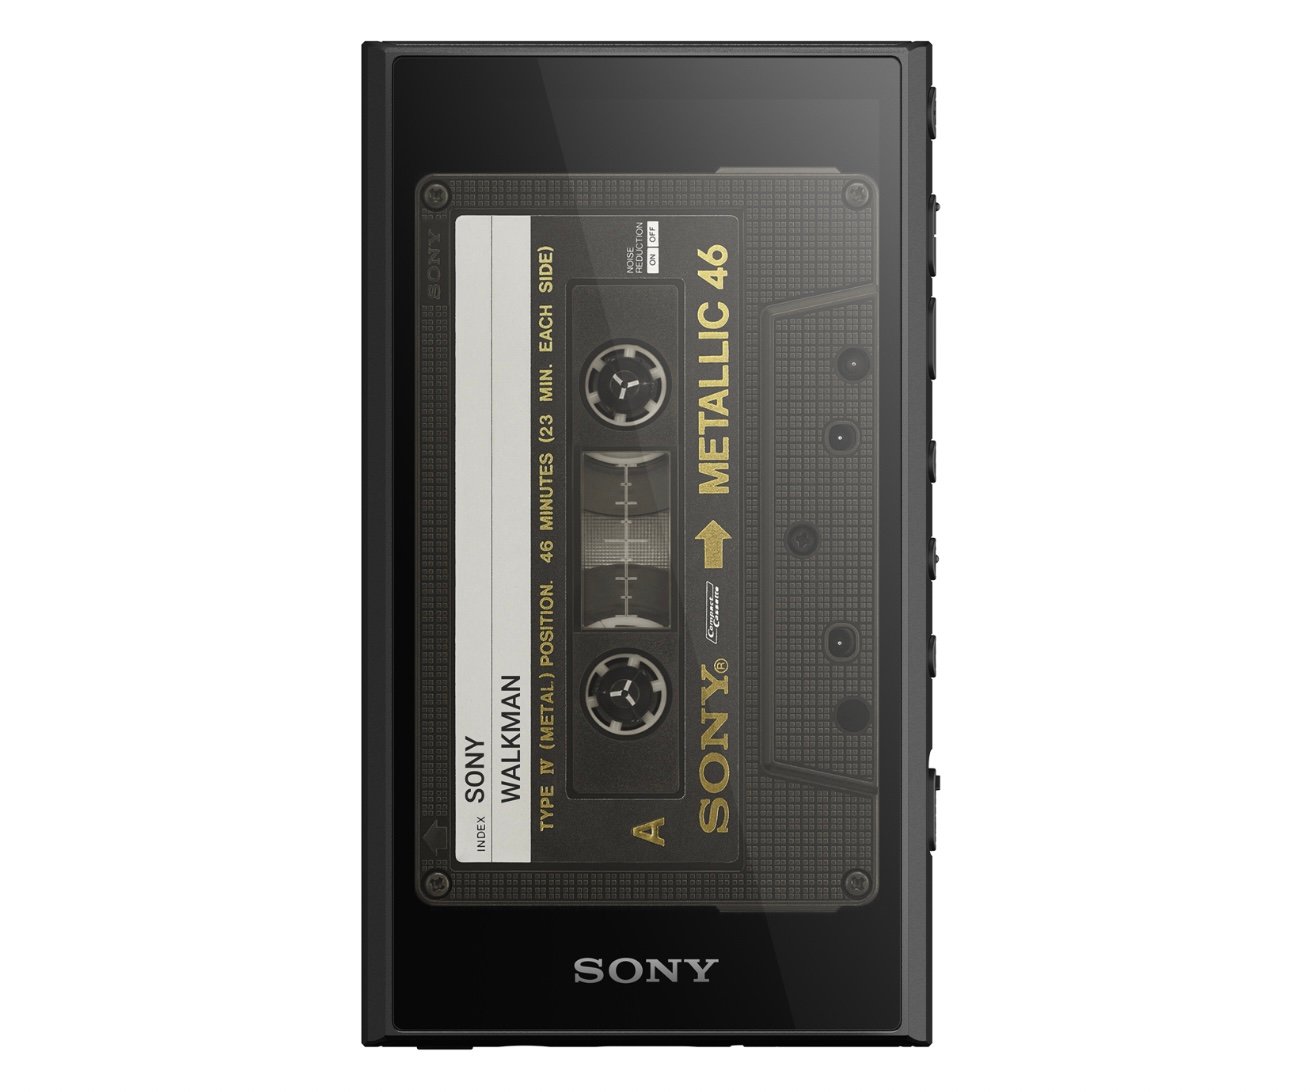 Could the Walkman be staging a massive comeback in 2023?